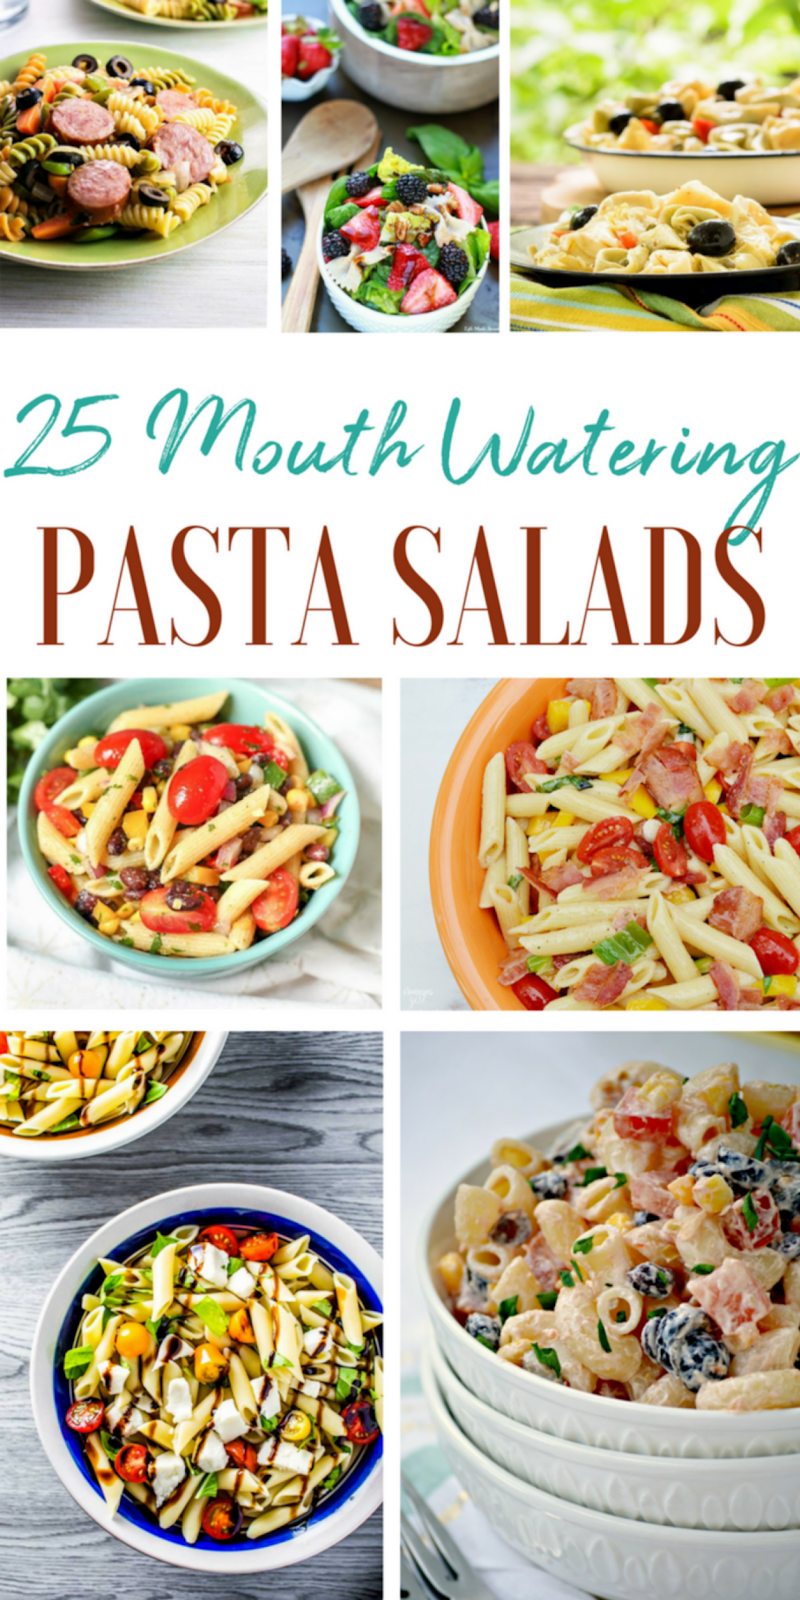 Mom's Coffee Shop: 25 Mouth Watering Pasta Salads